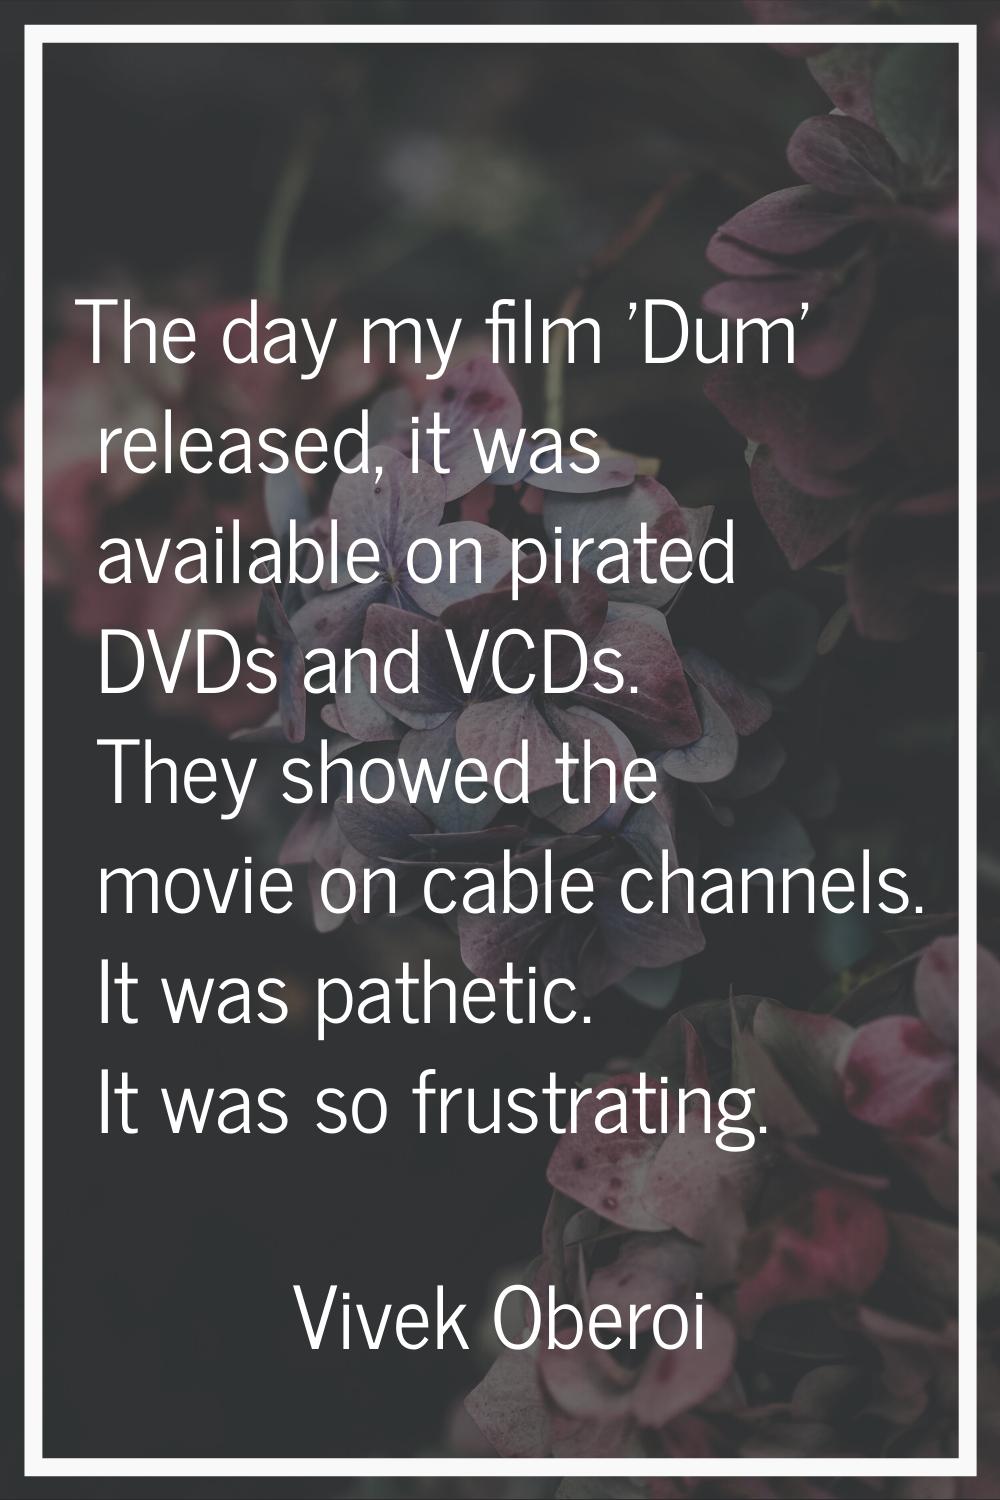 The day my film 'Dum' released, it was available on pirated DVDs and VCDs. They showed the movie on